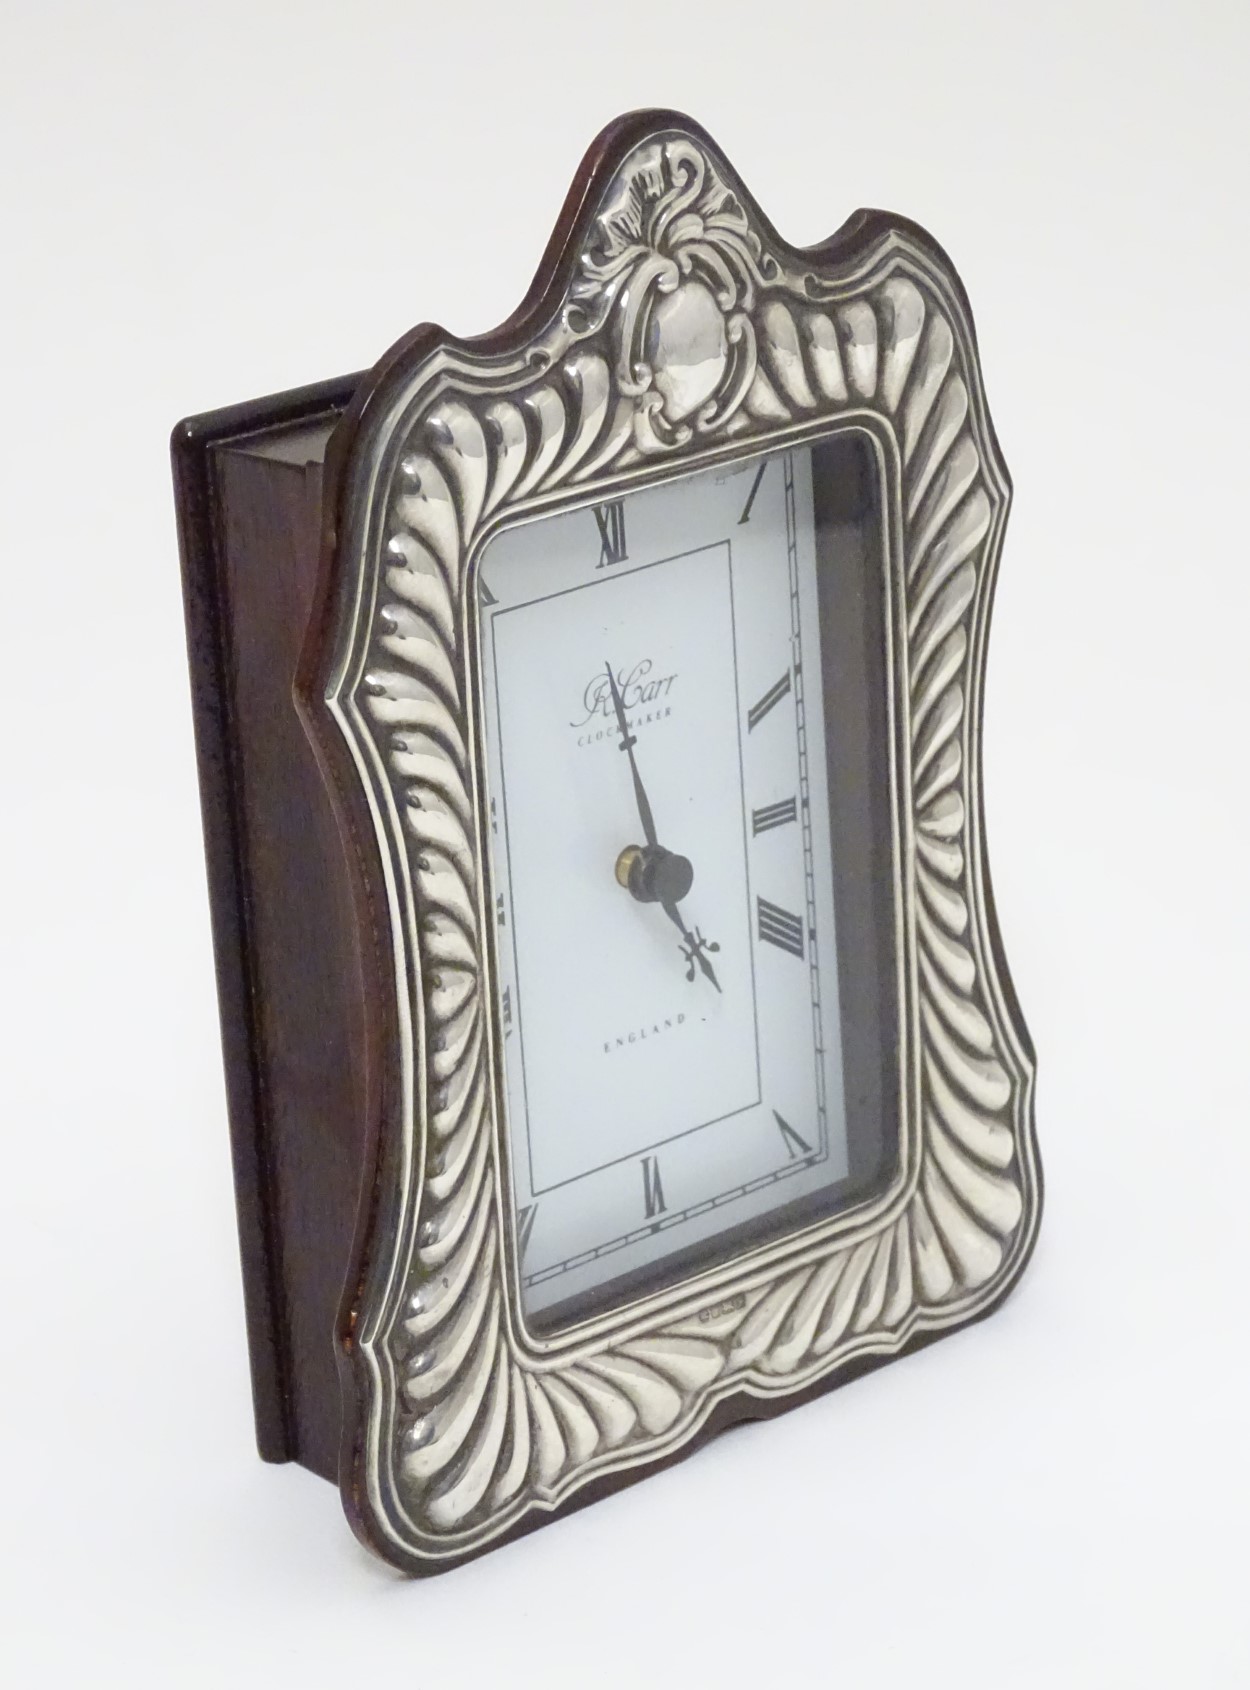 A small wooden cased mantle clock with silver surround hallmarked Sheffield 1989 maker Carrs of - Image 3 of 6